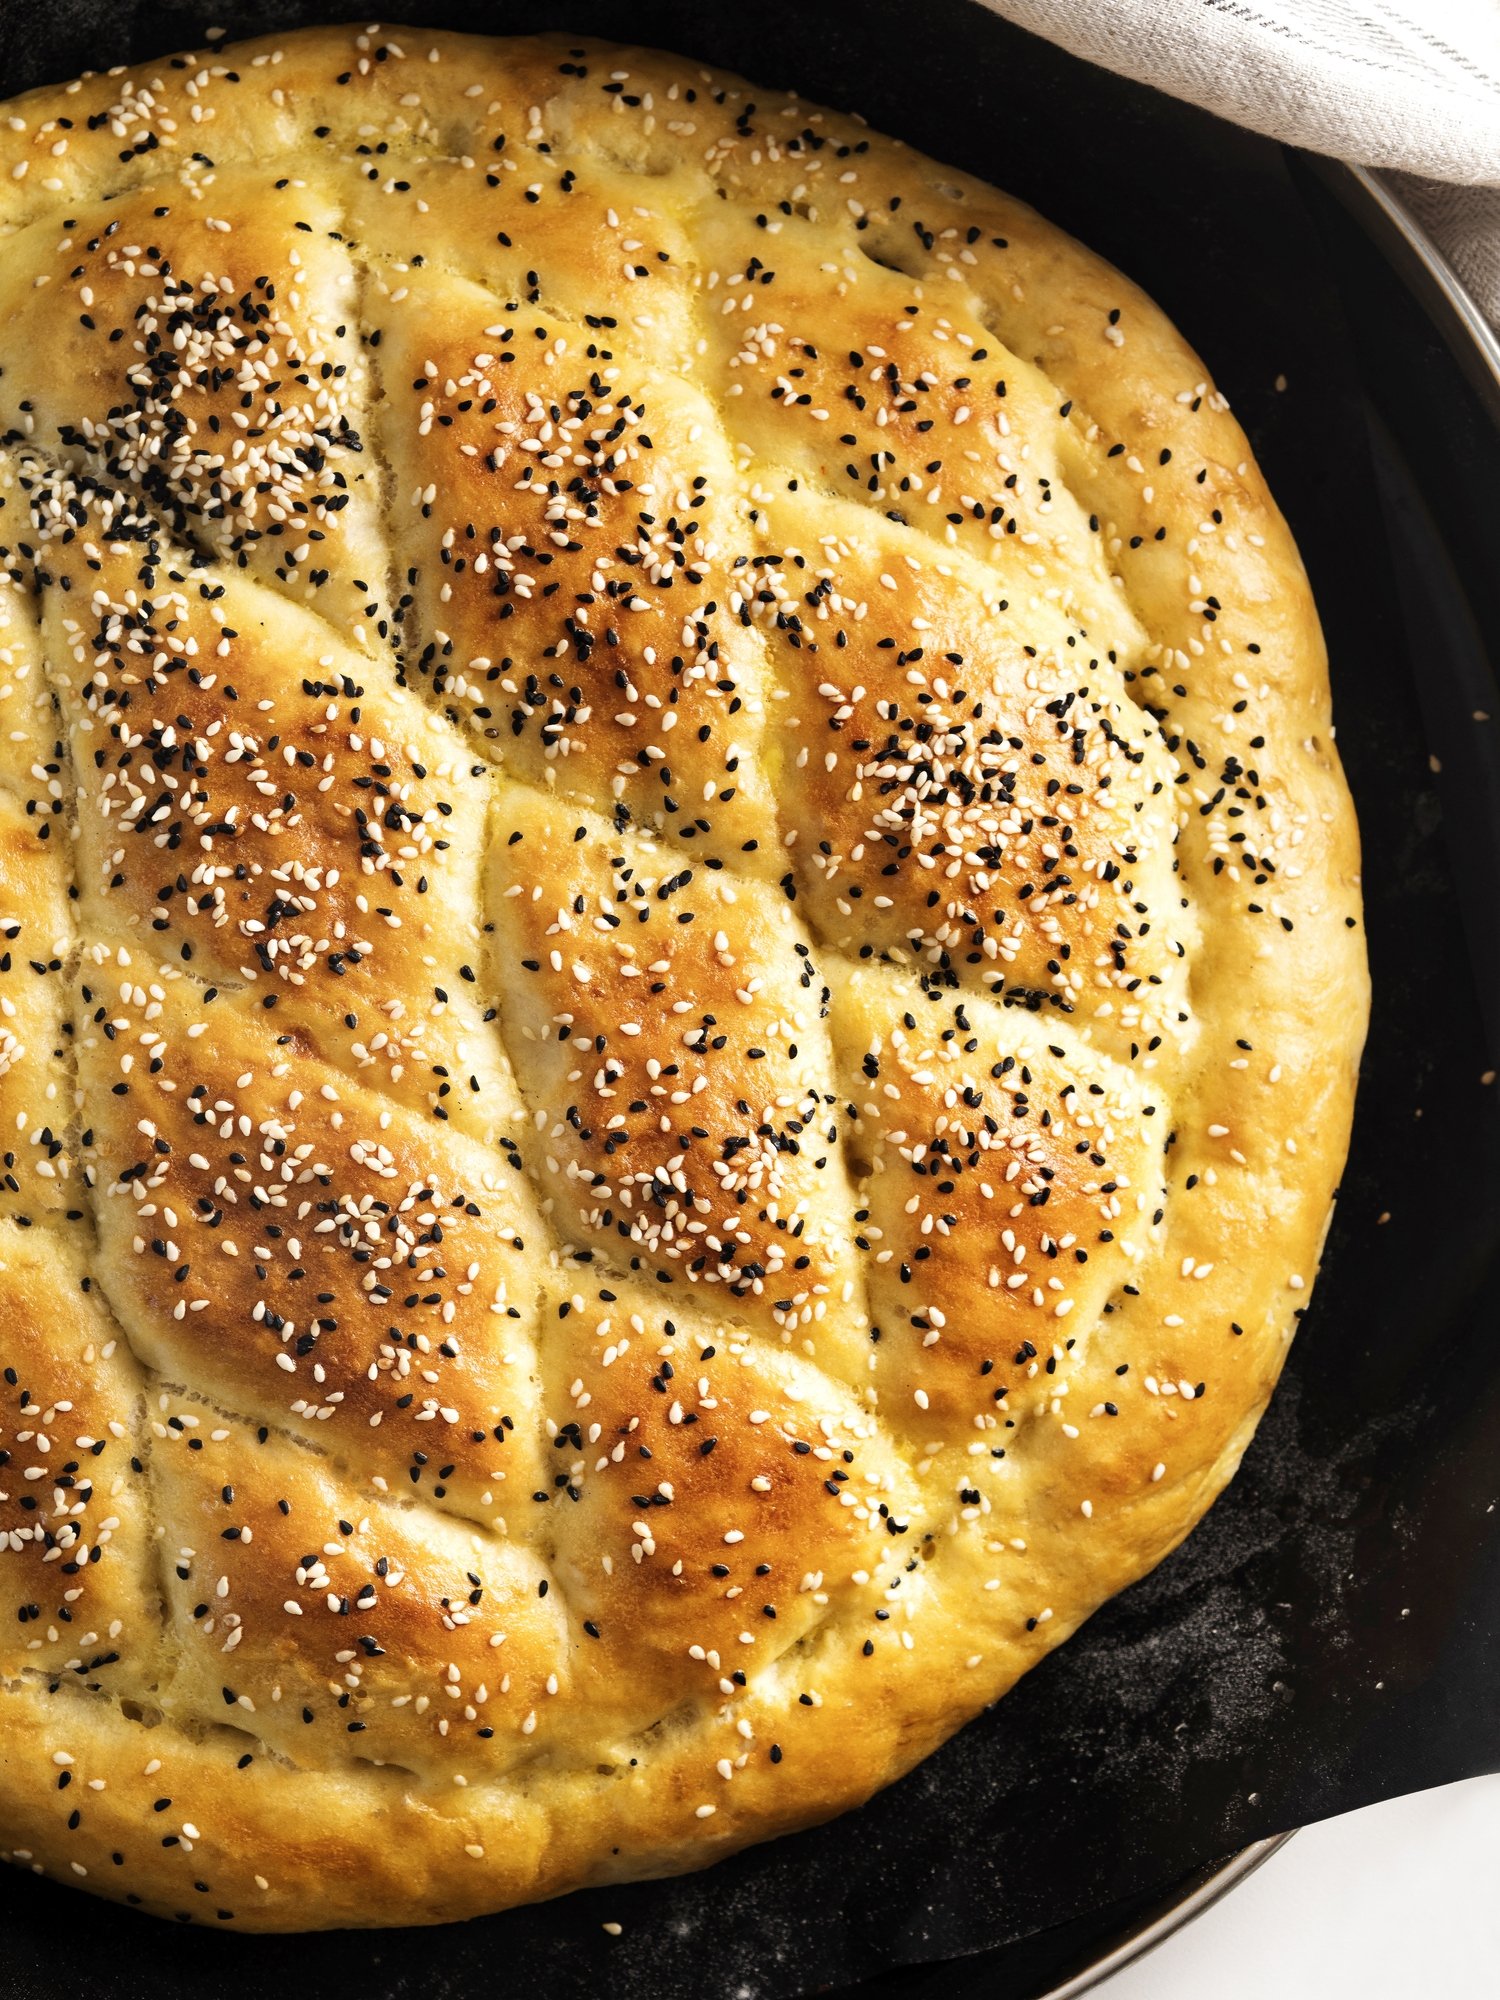 Decorated with sesame and nigella seeds, the Ramazan pide is a staple food in Turkey. (iStock Photo)